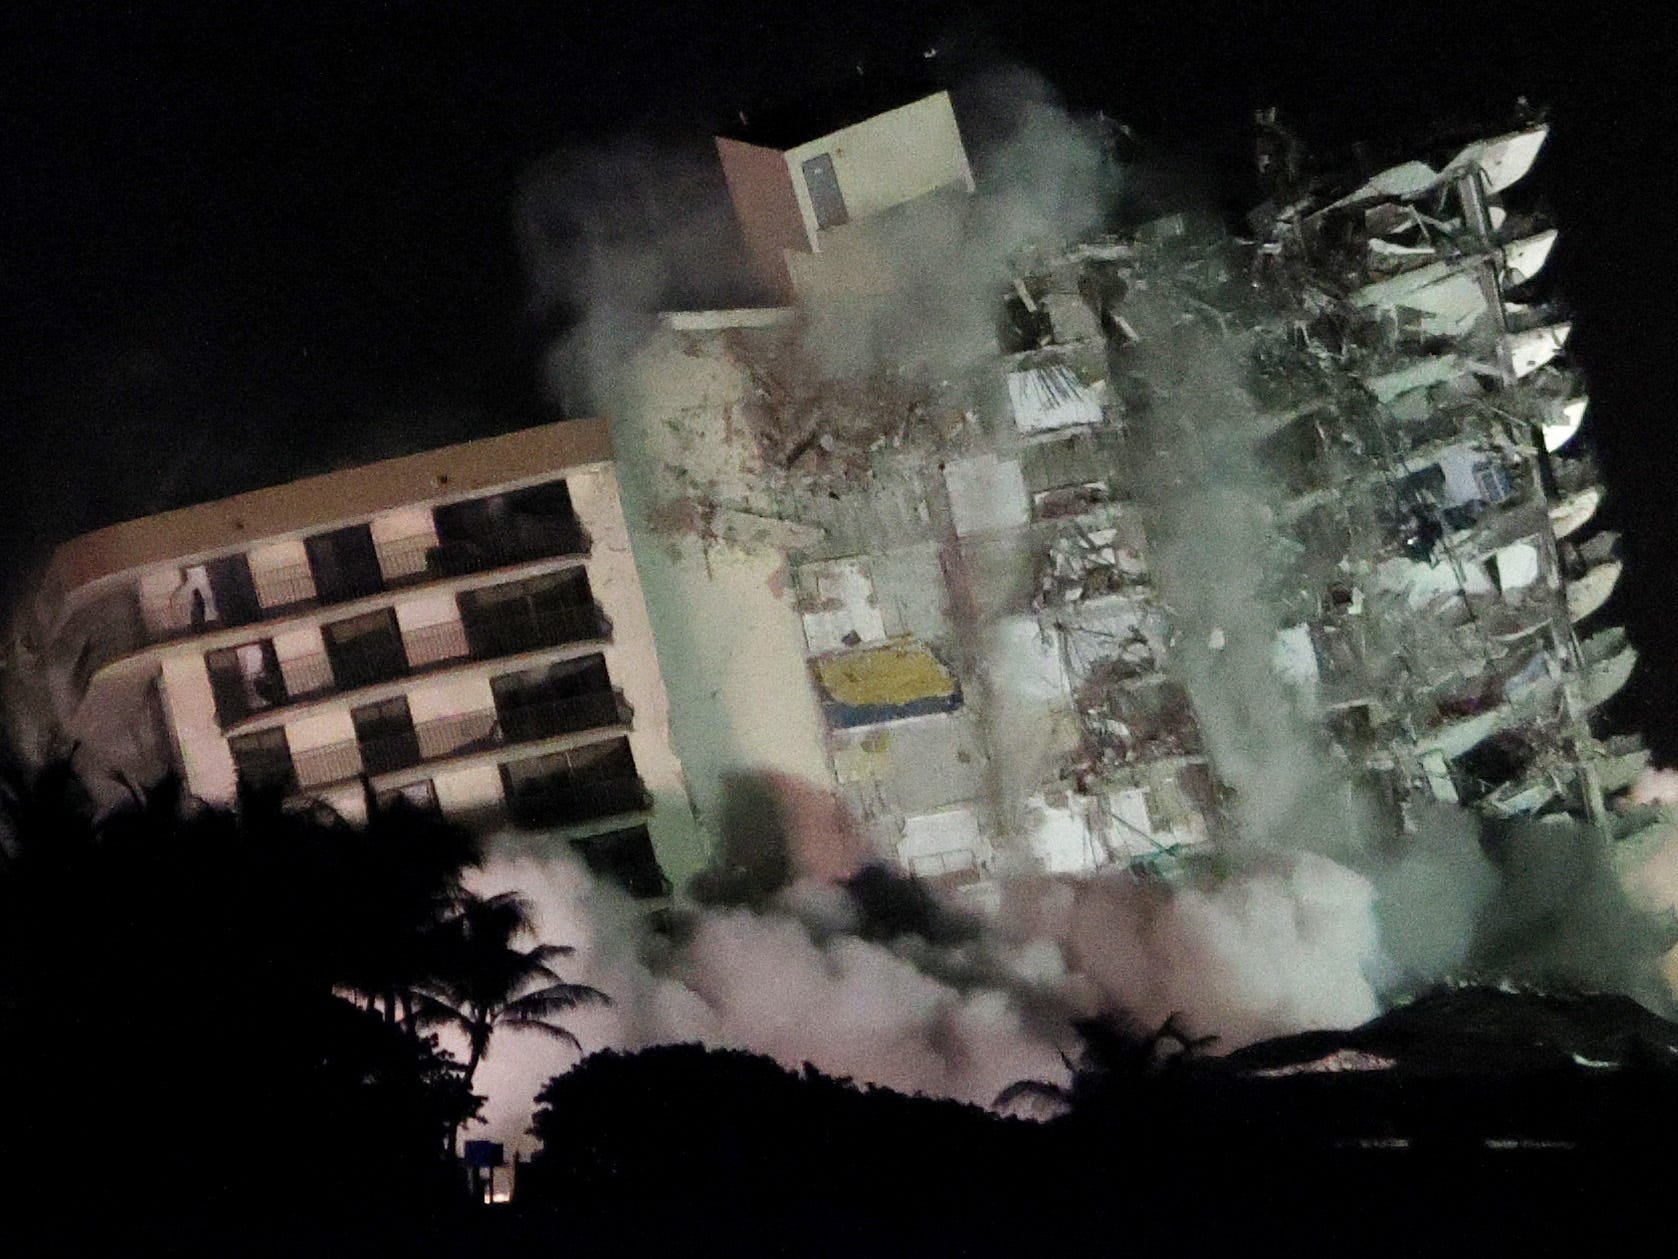 The remaining part of the partially collapsed 12-story Champlain Towers South condo building falls with a controlled demolition on July 4, 2021 in Surfside, Florida.